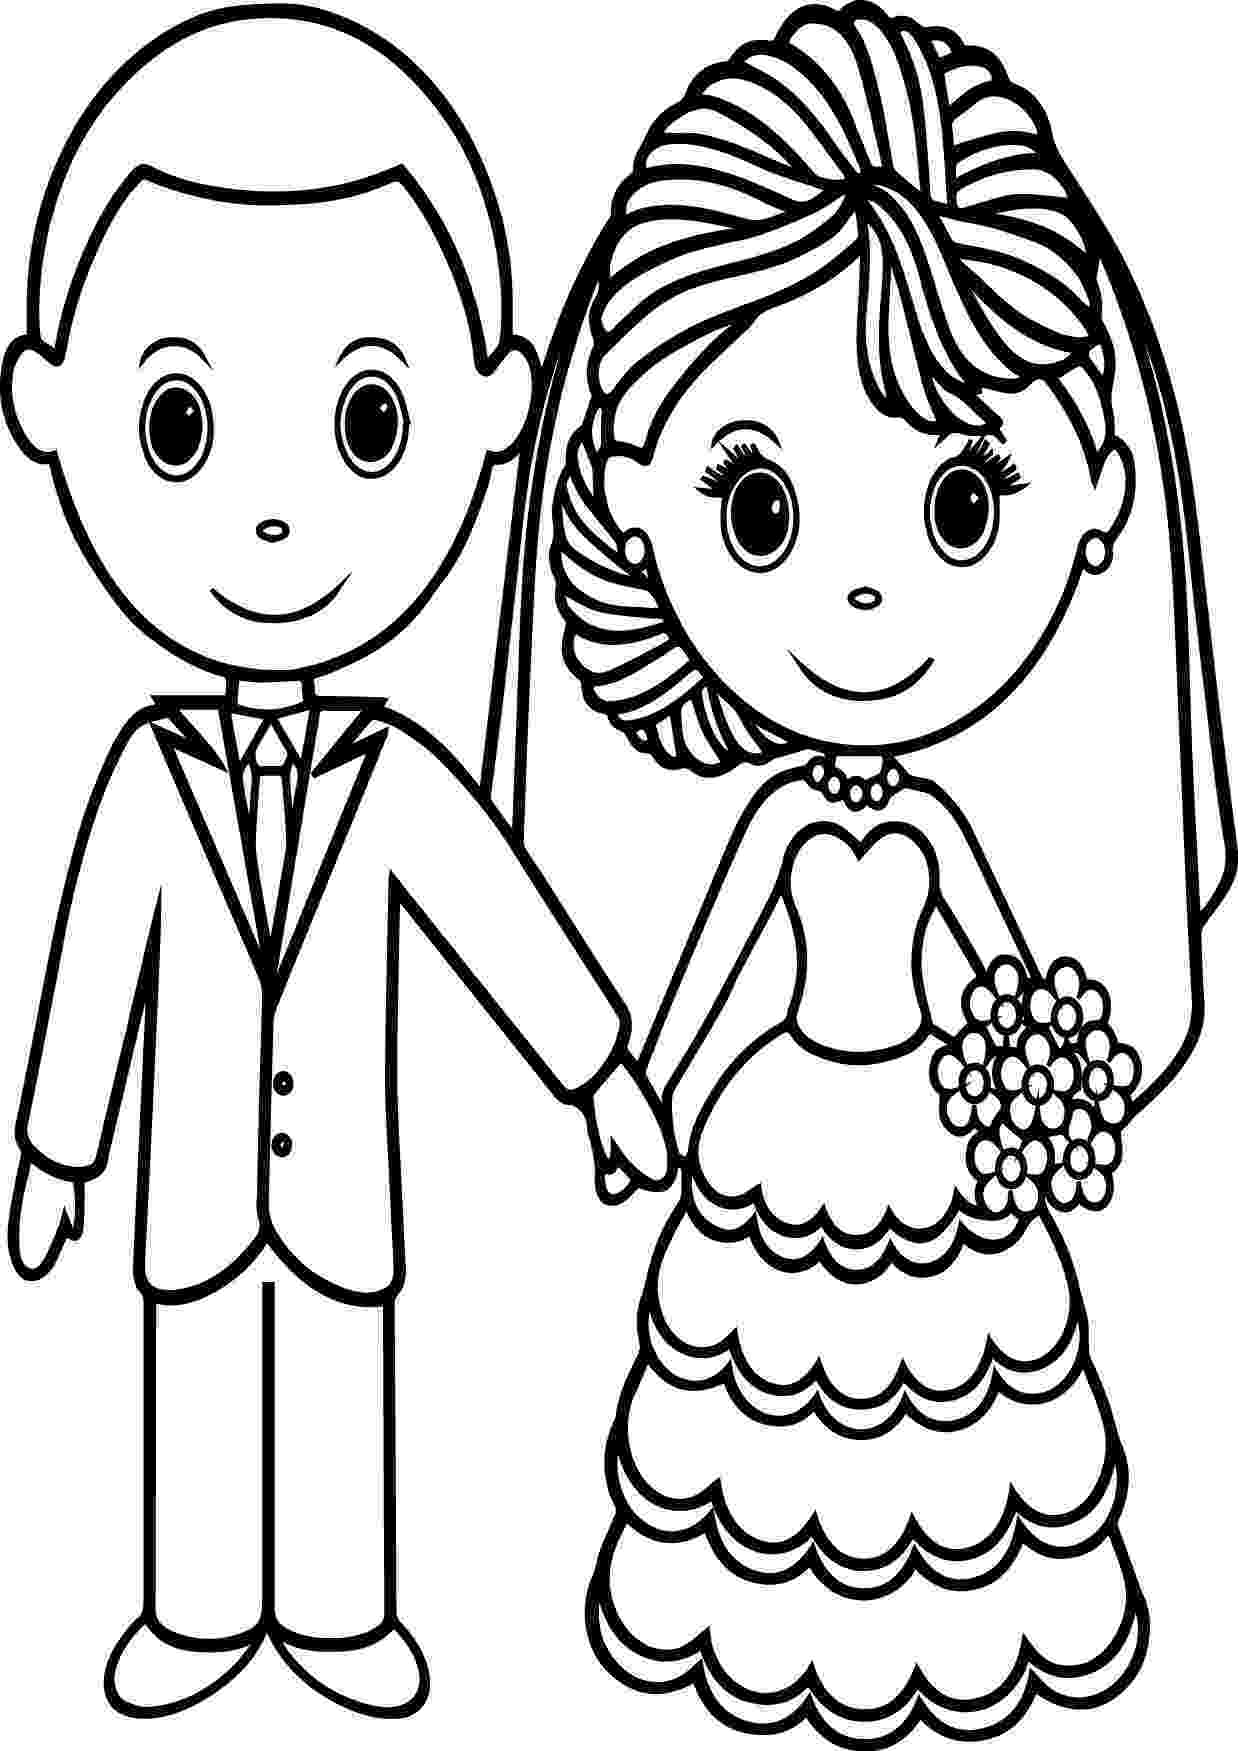 free wedding coloring pages to print 17 wedding coloring pages for kids who love to dream about print coloring pages wedding free to 